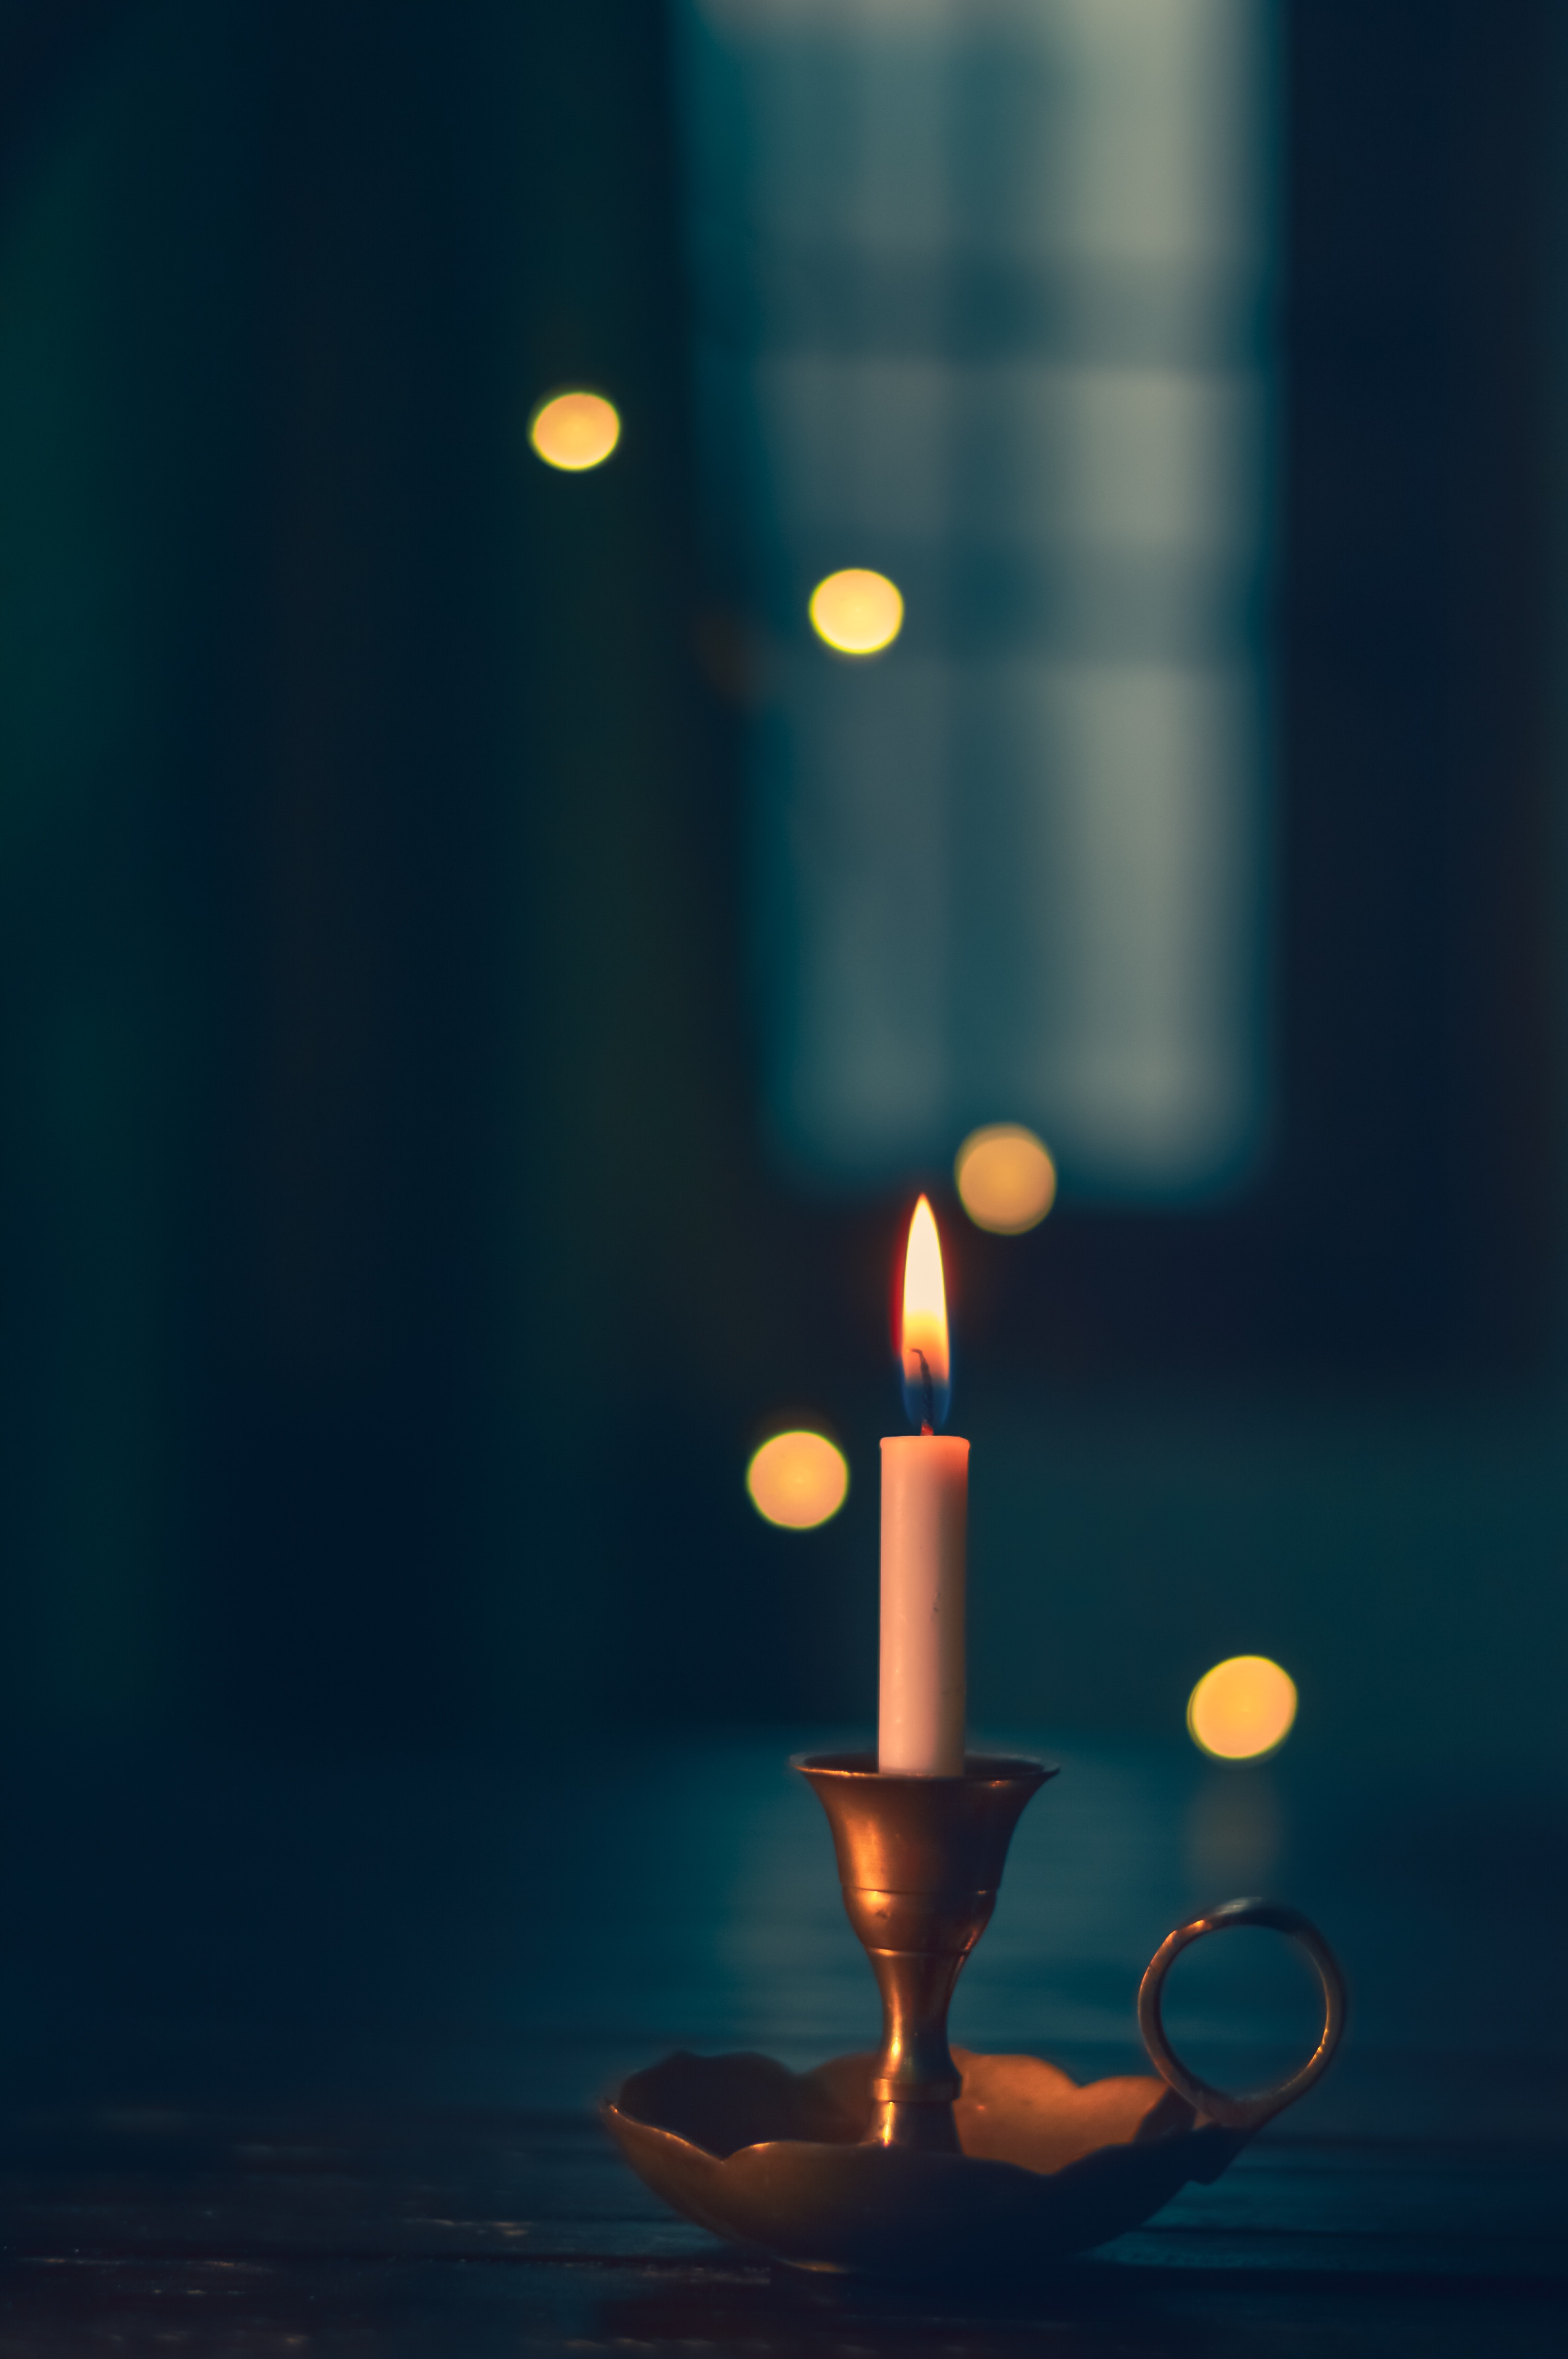 miscellanea, blur, wax, candle, candlestick, fire, miscellaneous, smooth, wick Full HD